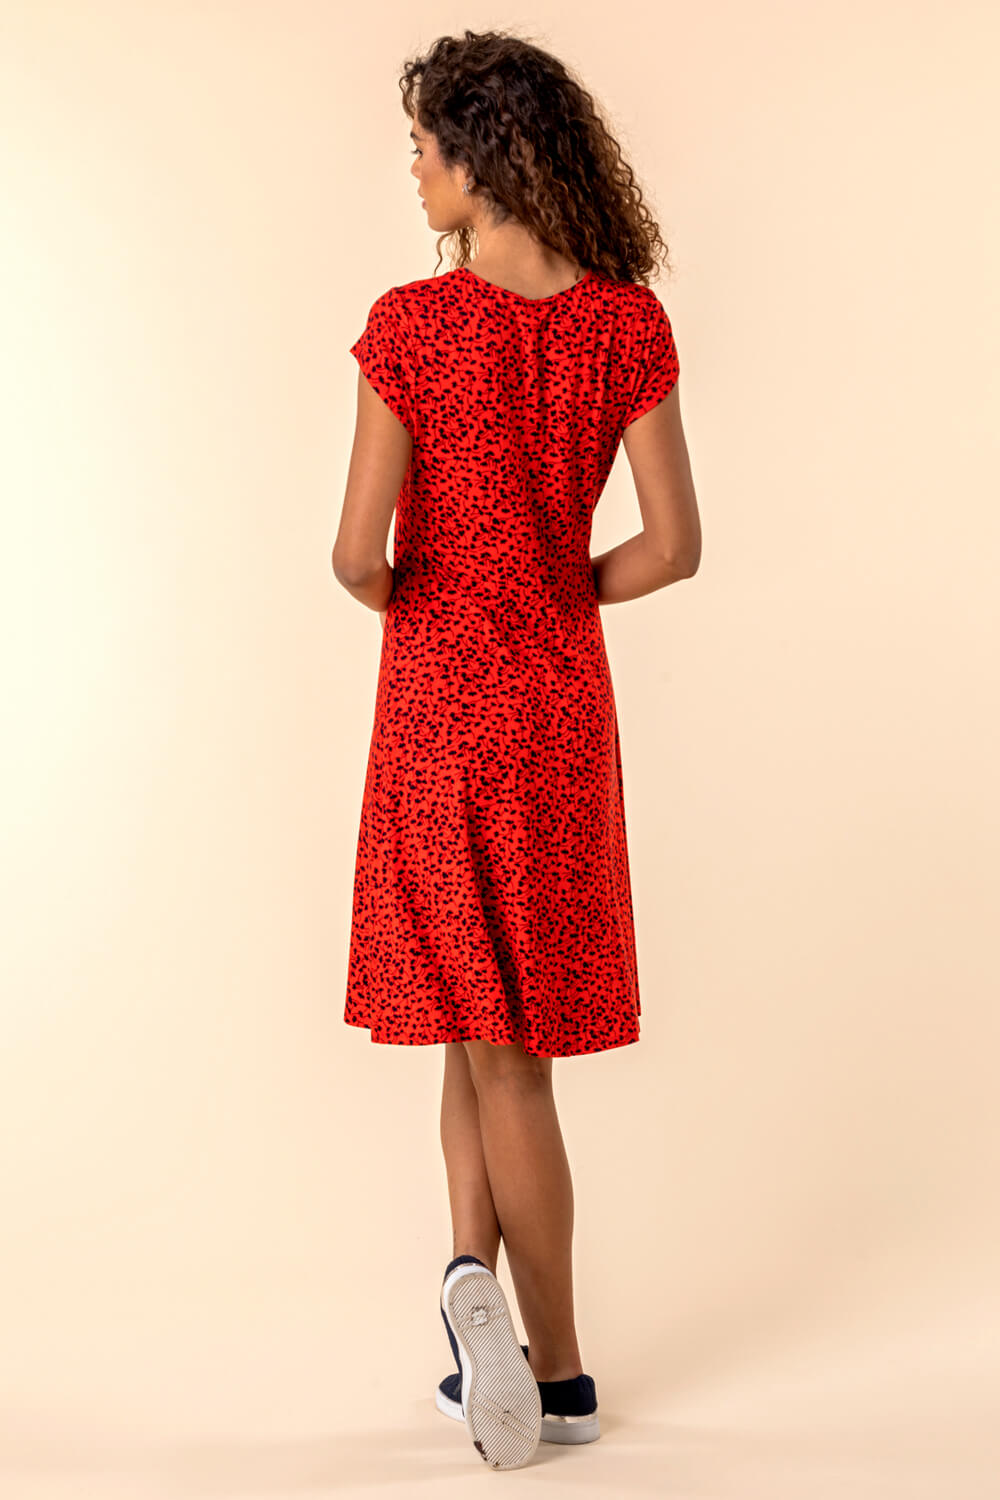 Red Printed Jersey Tea Dress, Image 2 of 4